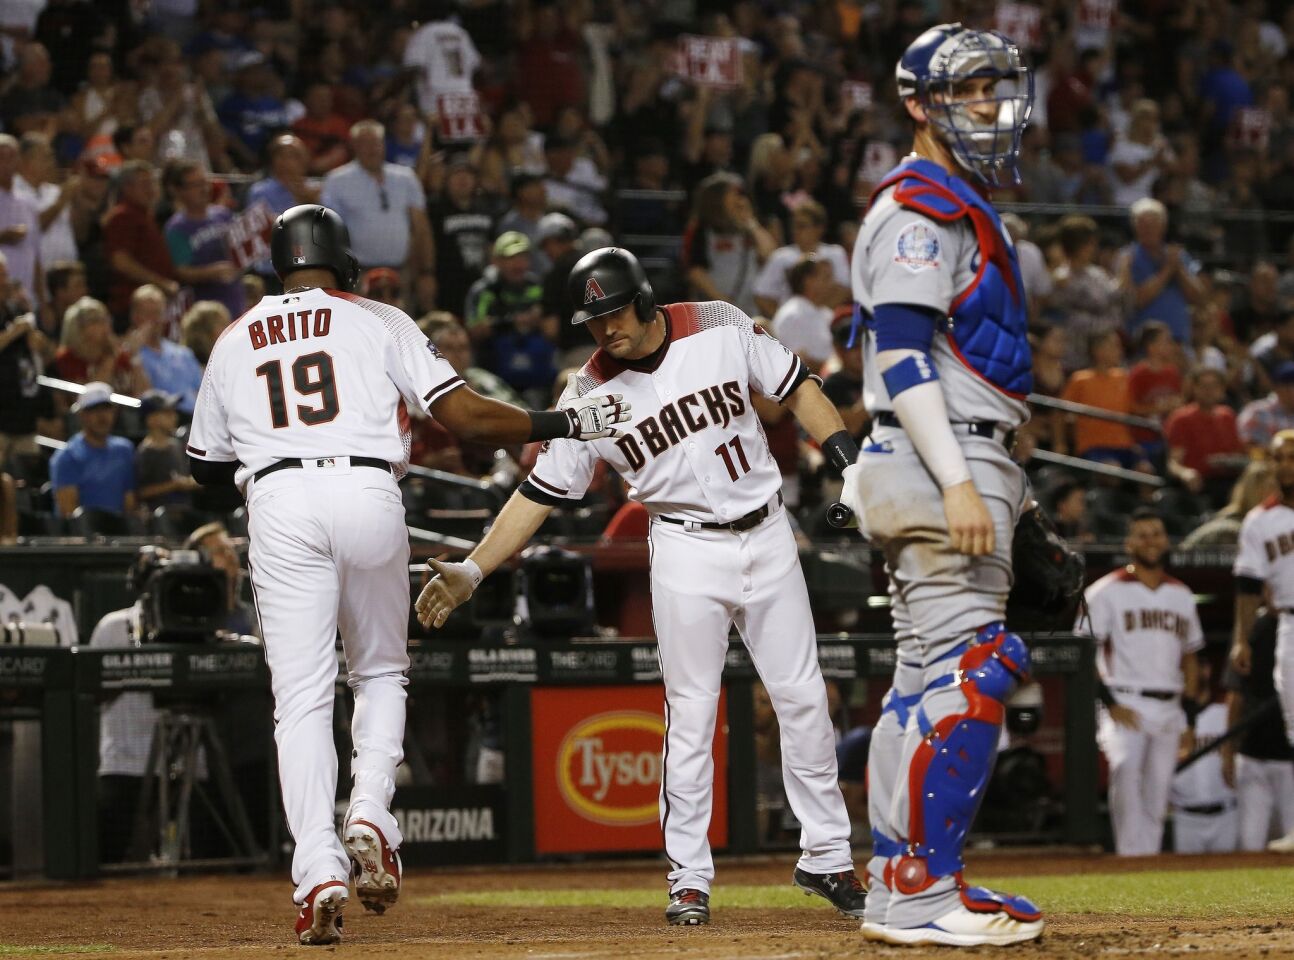 Arizona Diamondbacks' Socrates Brito (19) celebrates his home run with A.J. Pollock (11) as Los Angeles Dodgers catcher Yasmani Grandal, right, pauses at home plate during the second inning of a baseball game Wednesday, Sept. 26, 2018, in Phoenix. (AP Photo/Ross D. Franklin)